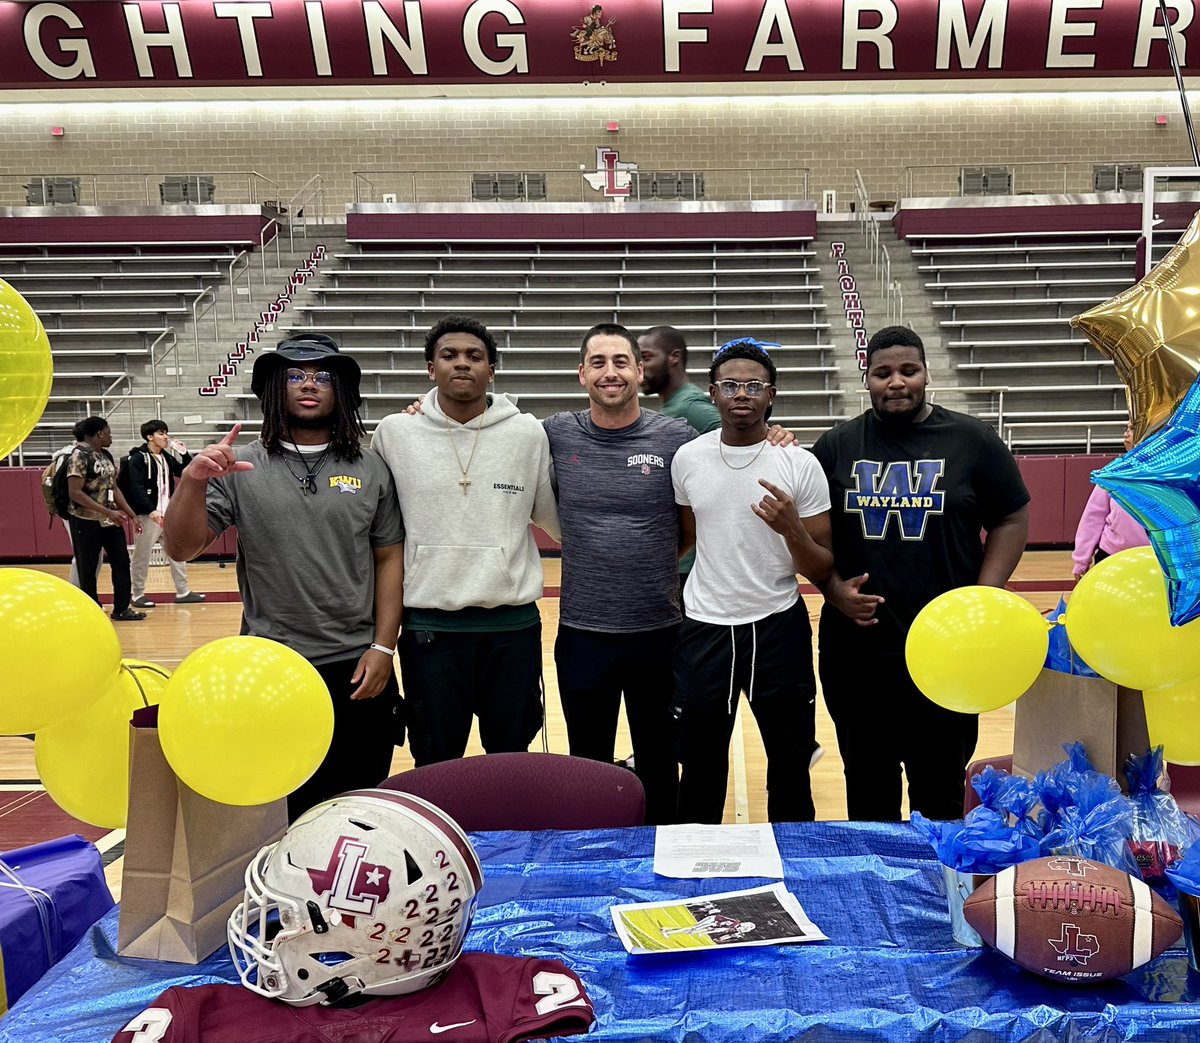 4️⃣ more Fighting Farmers signed their NLI today! @LHSFball Class of ‘24 now has 1️⃣7️⃣ young men furthering their education & playing the game they love! @vance22x ➡️ @kwufootball @K_Reese00 ➡️ @MajorsFootball @23BACONN ➡️ @WBUFootball @cwbanzz ➡️ @WBUFootball #RecruitTheLEW